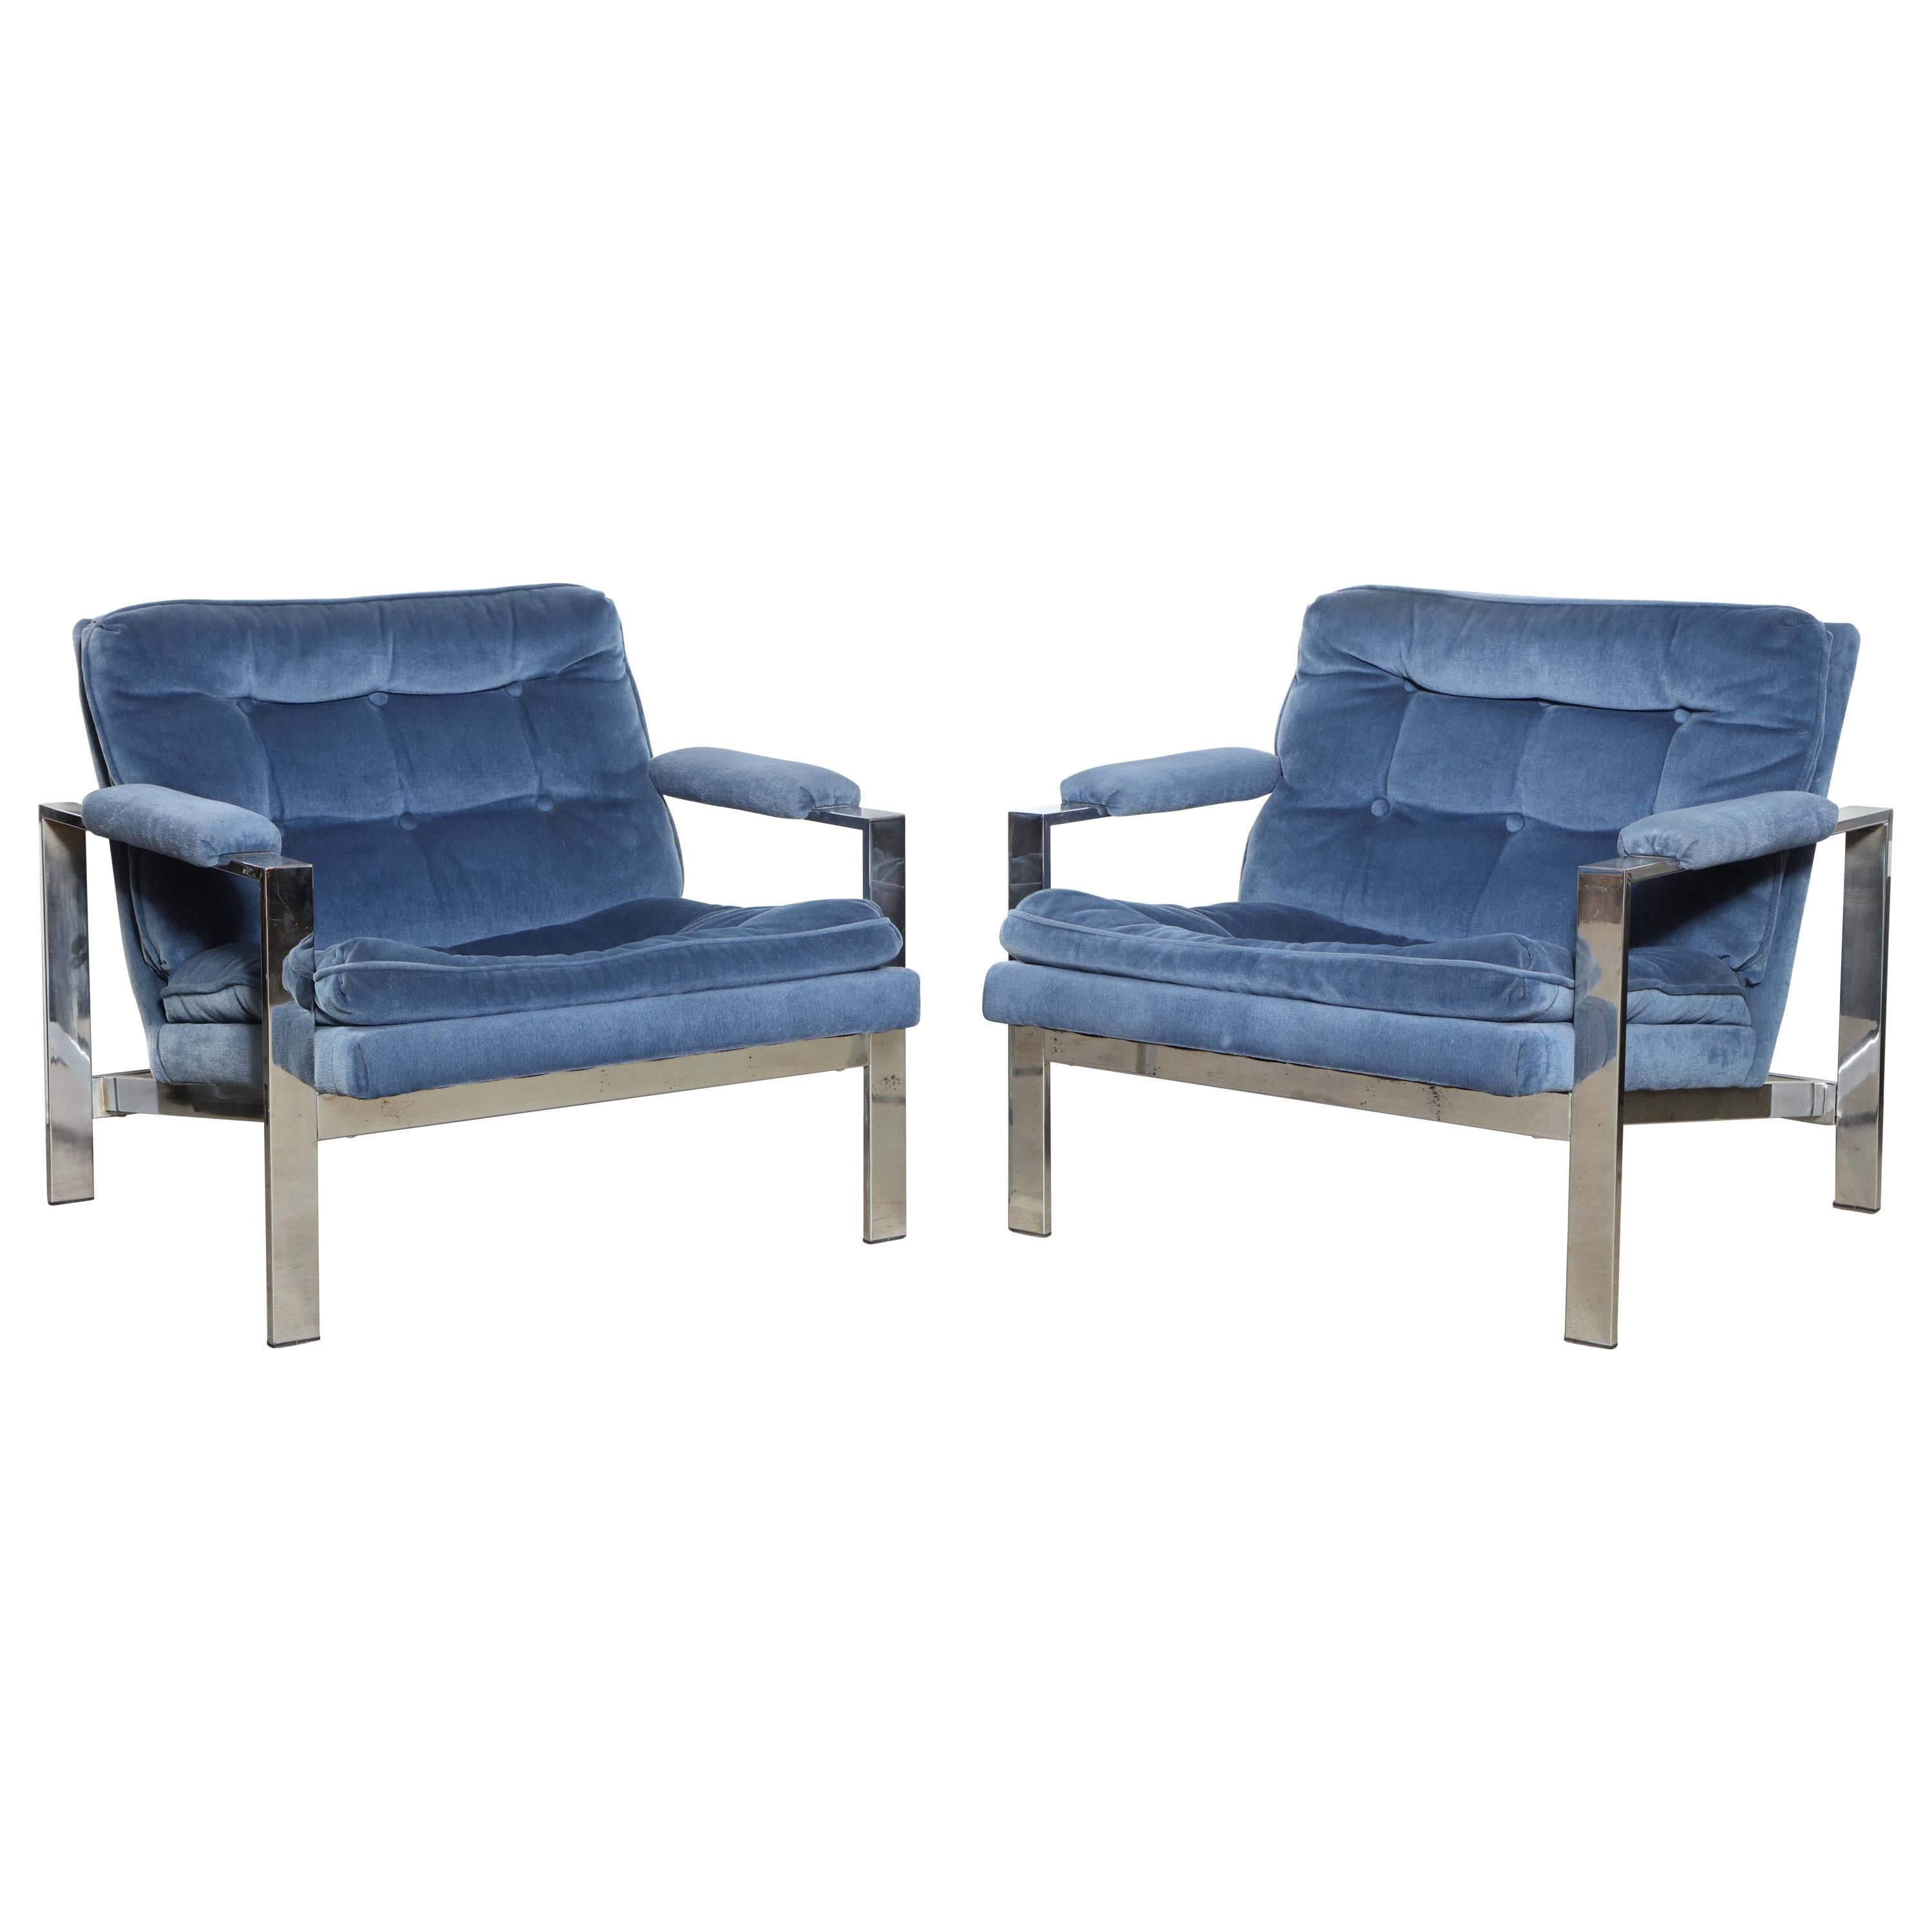 Pair of 1970's Cy Mann Solid Chrome Lounge Chairs in French Blue   